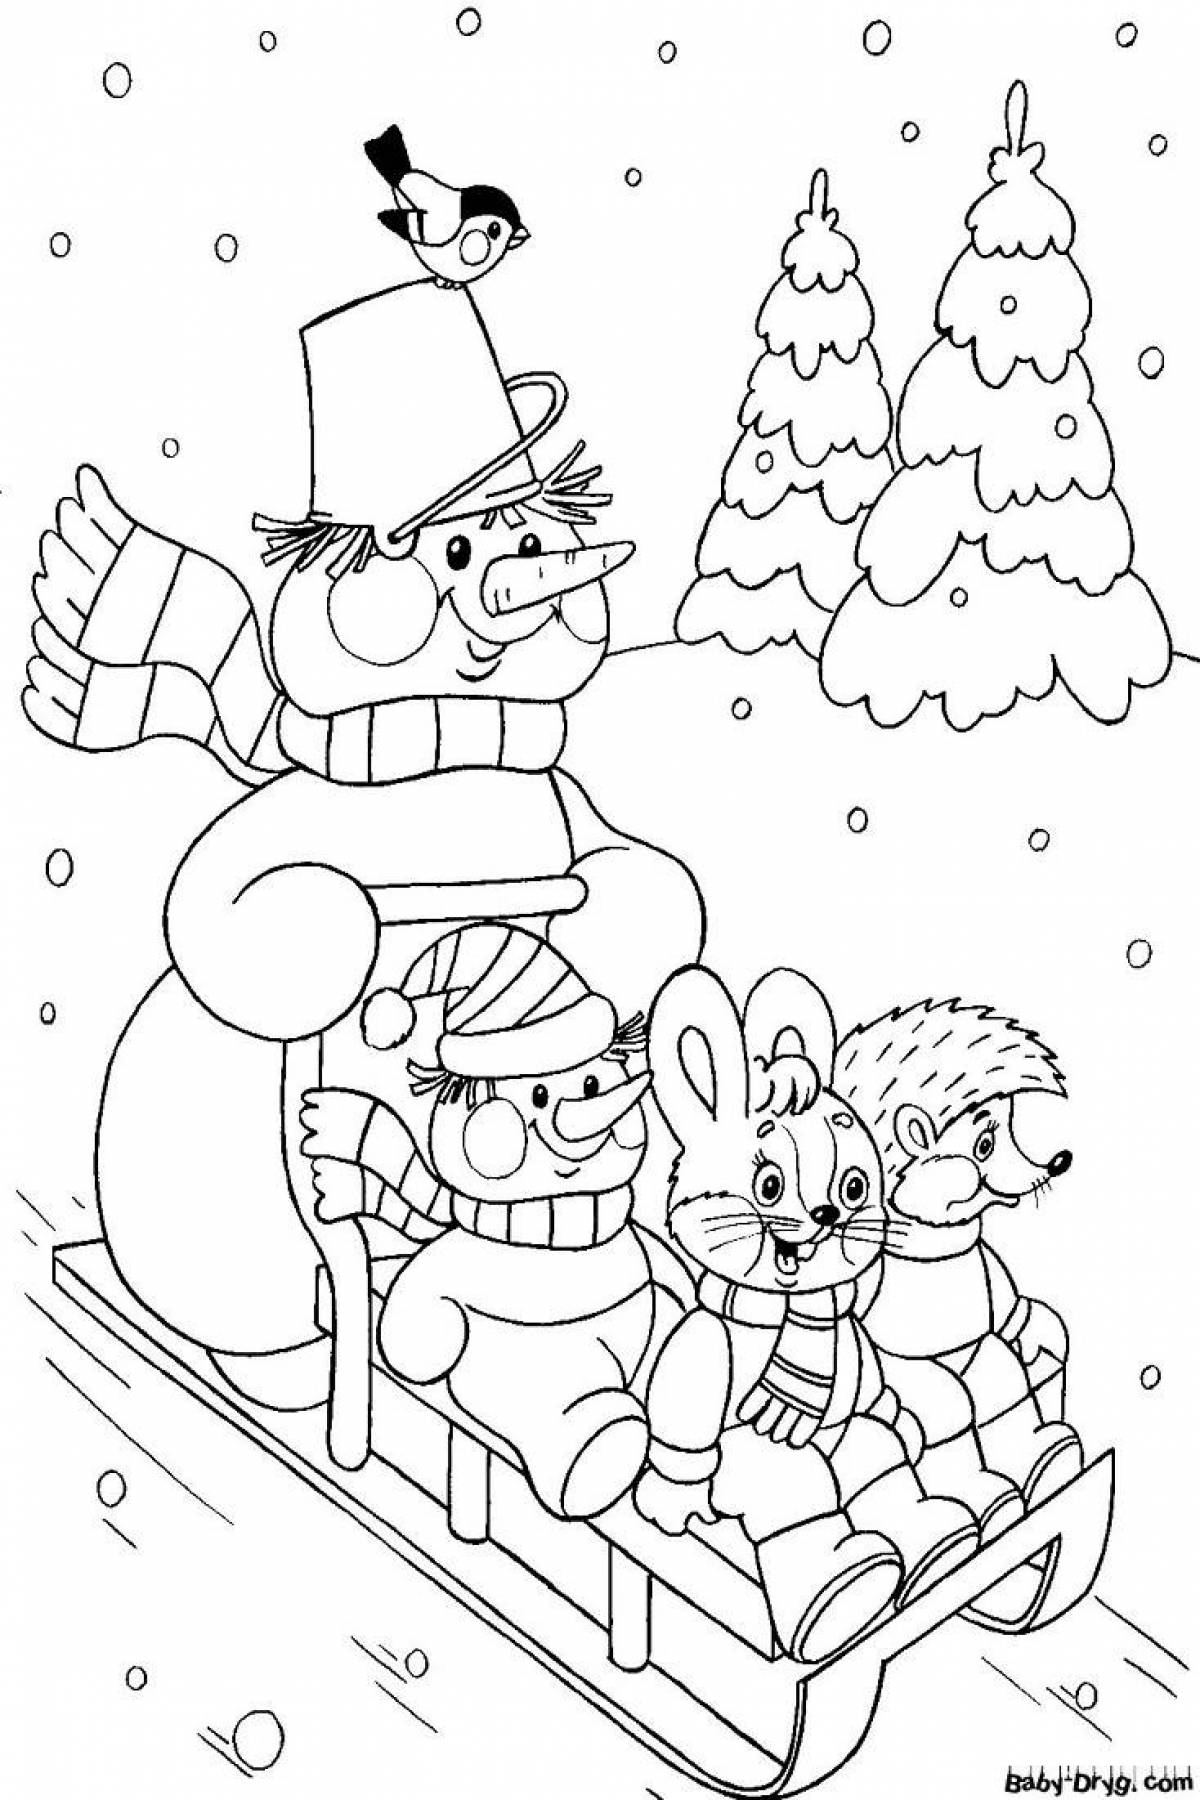 Exquisite winter coloring book for children 6-7 years old